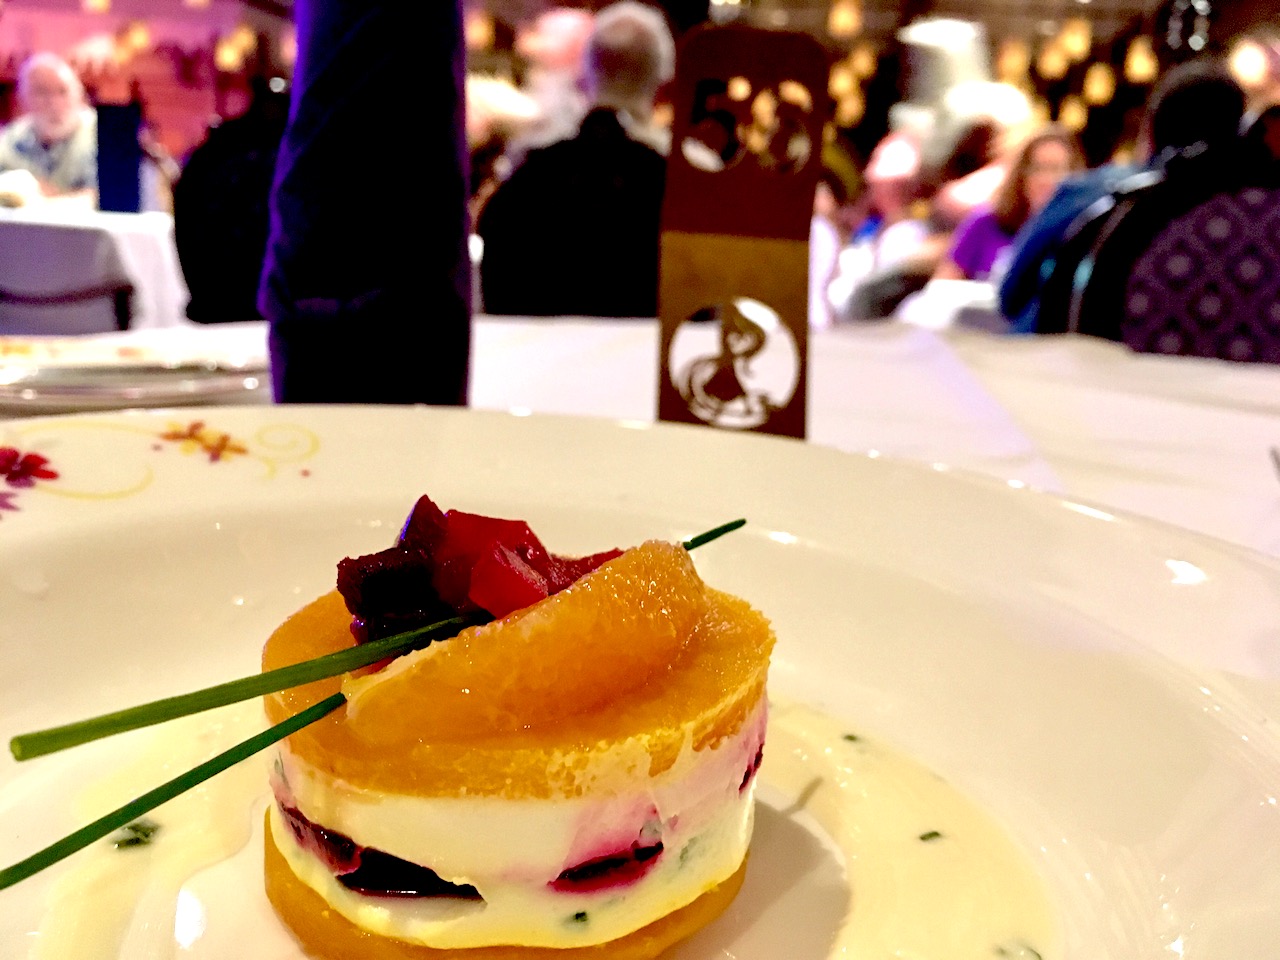 Creamy Goat Cheese and Yellow Beets at Rapunzel's Royal Table on board the Disney Magic